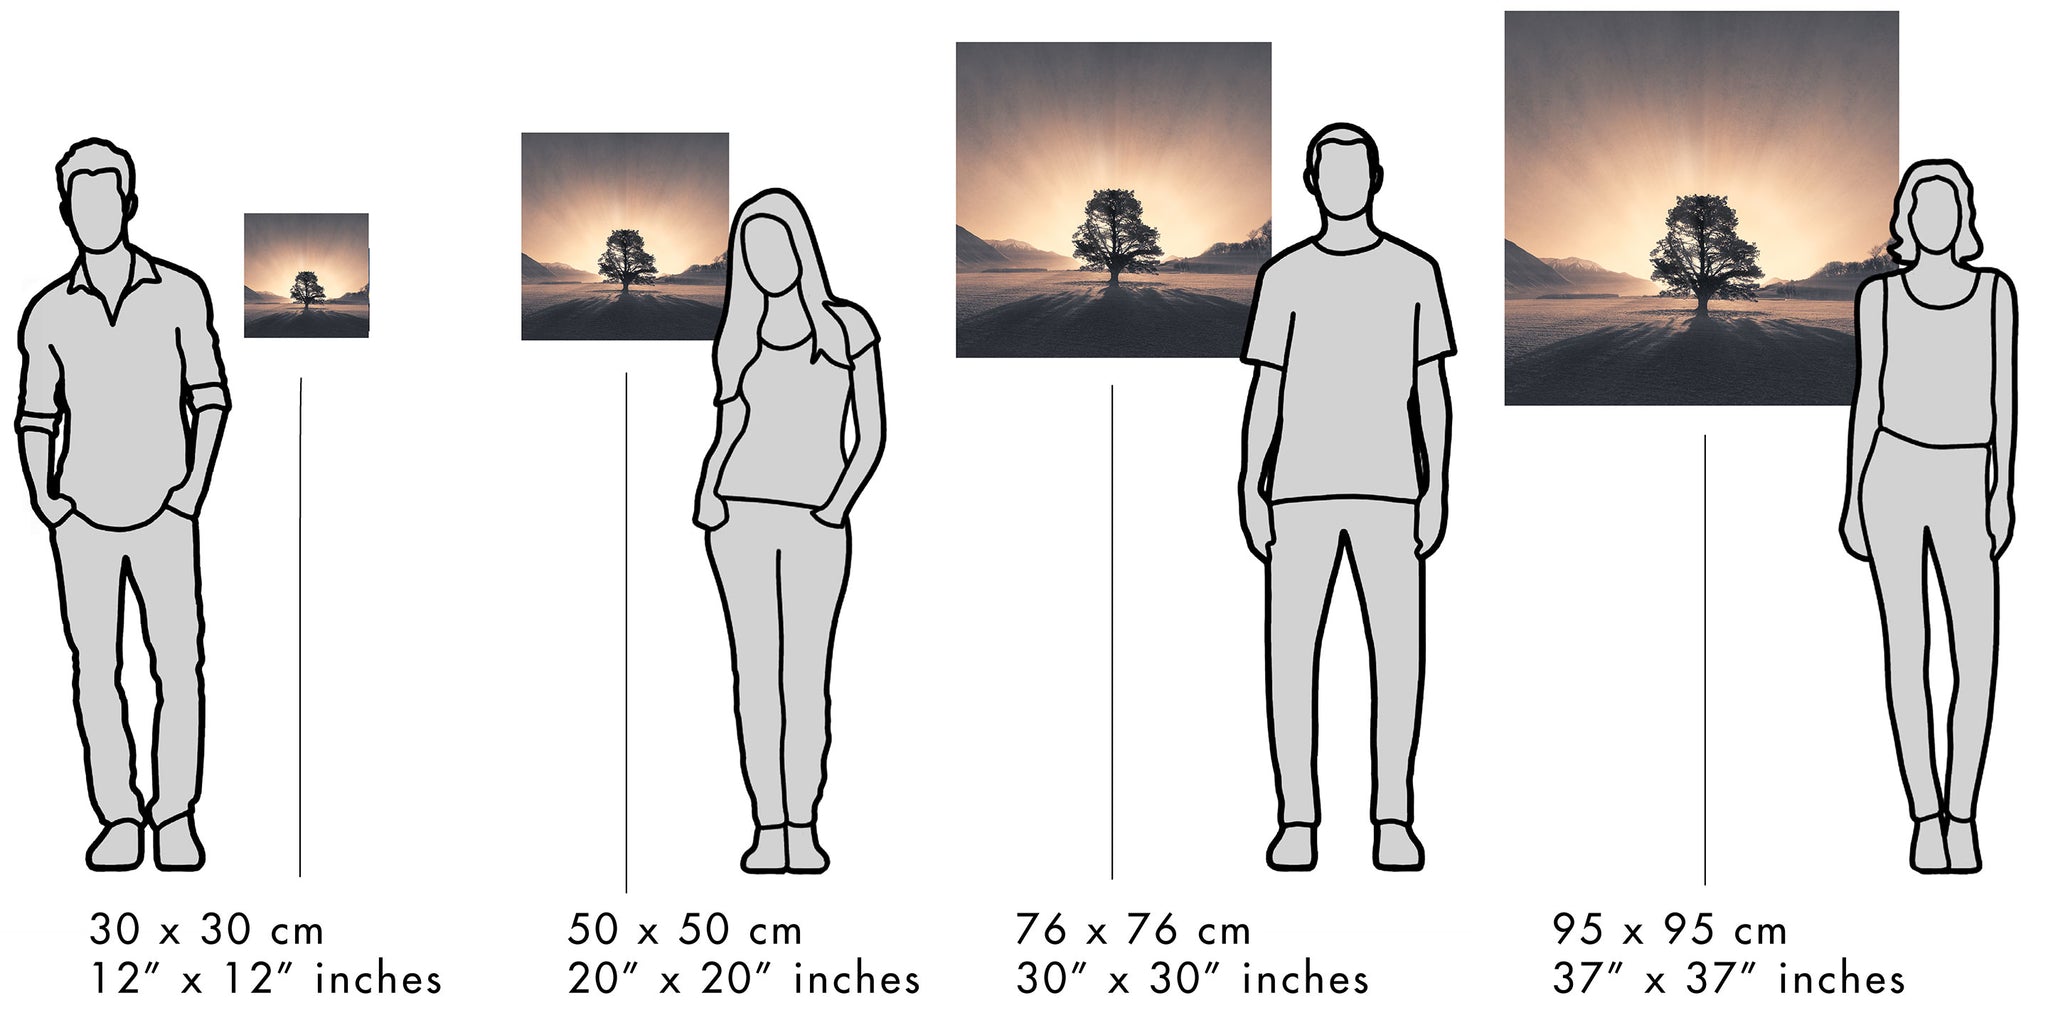 Visual size guide to compare the print or canvas sizes to people